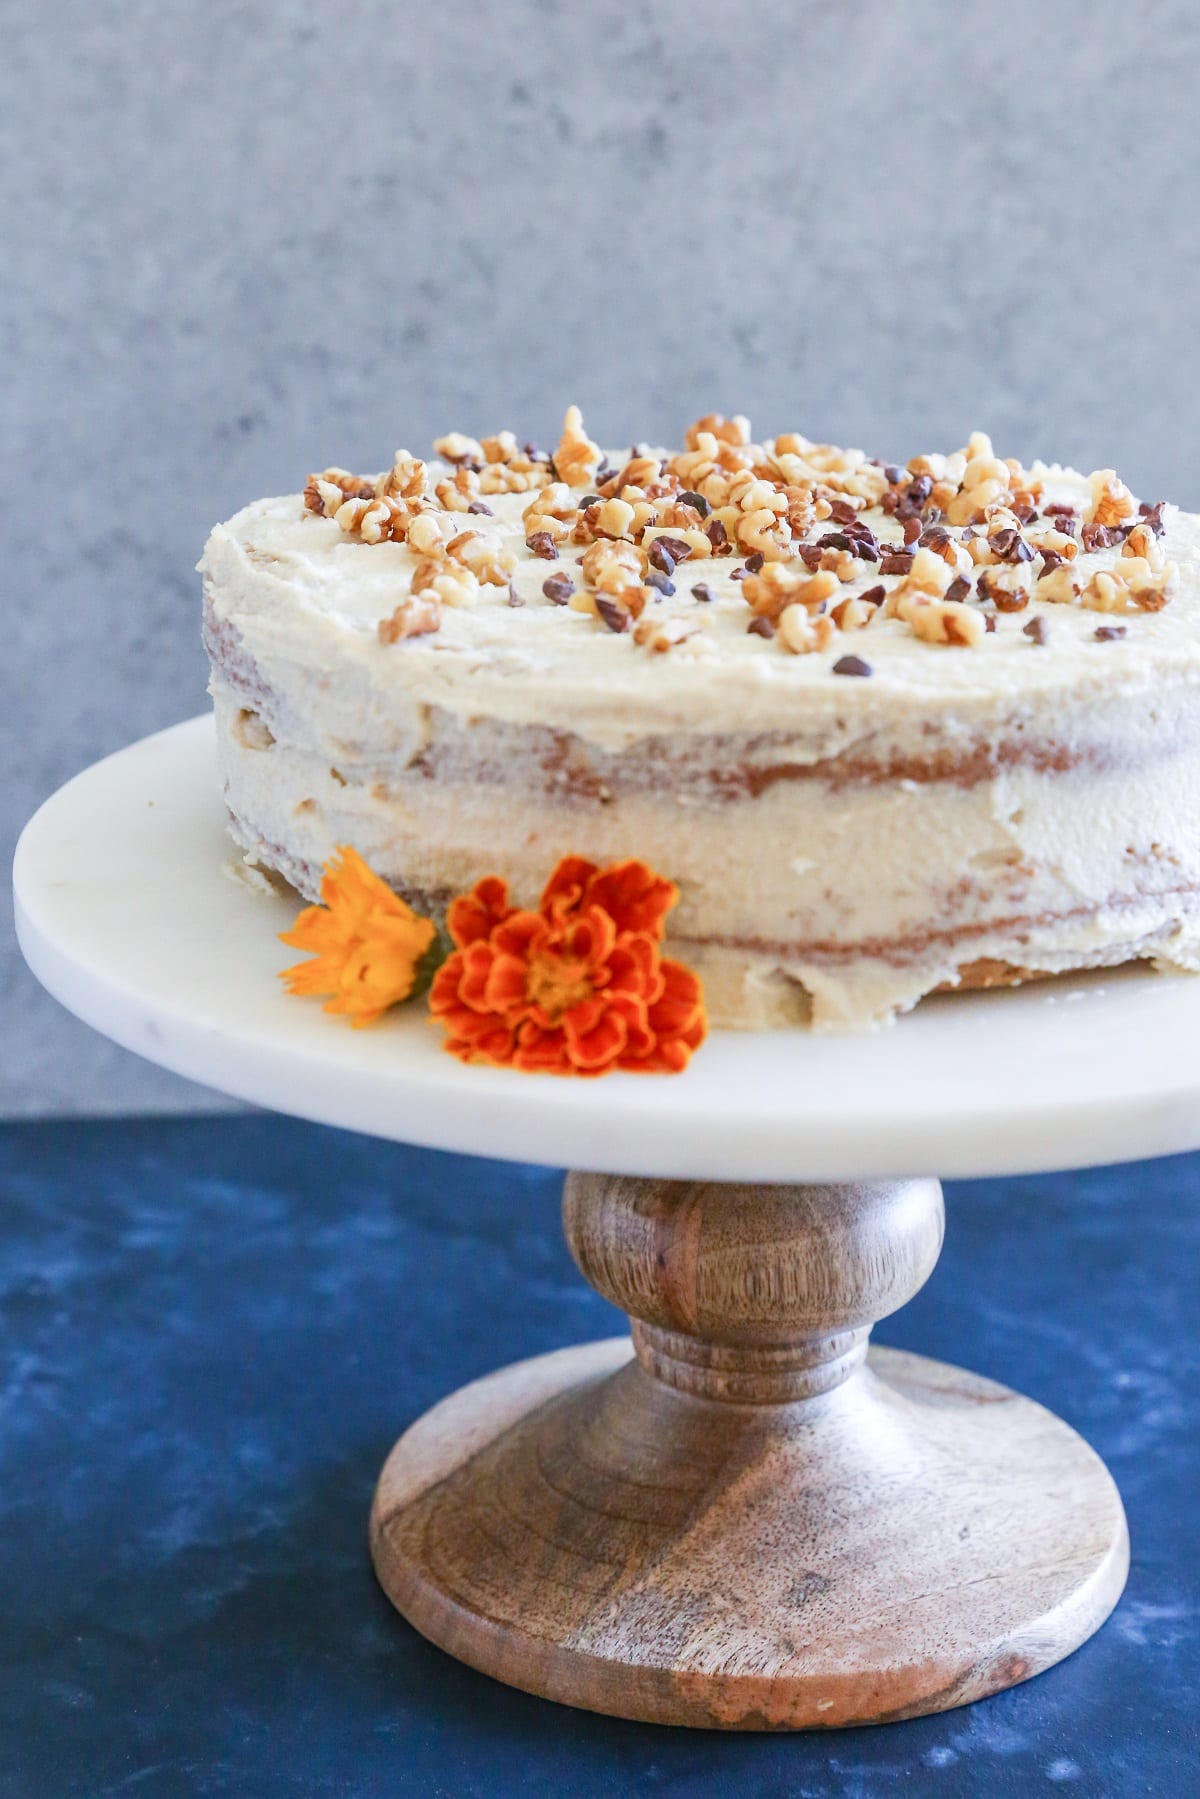 Whole carrot cake on a cake stand.